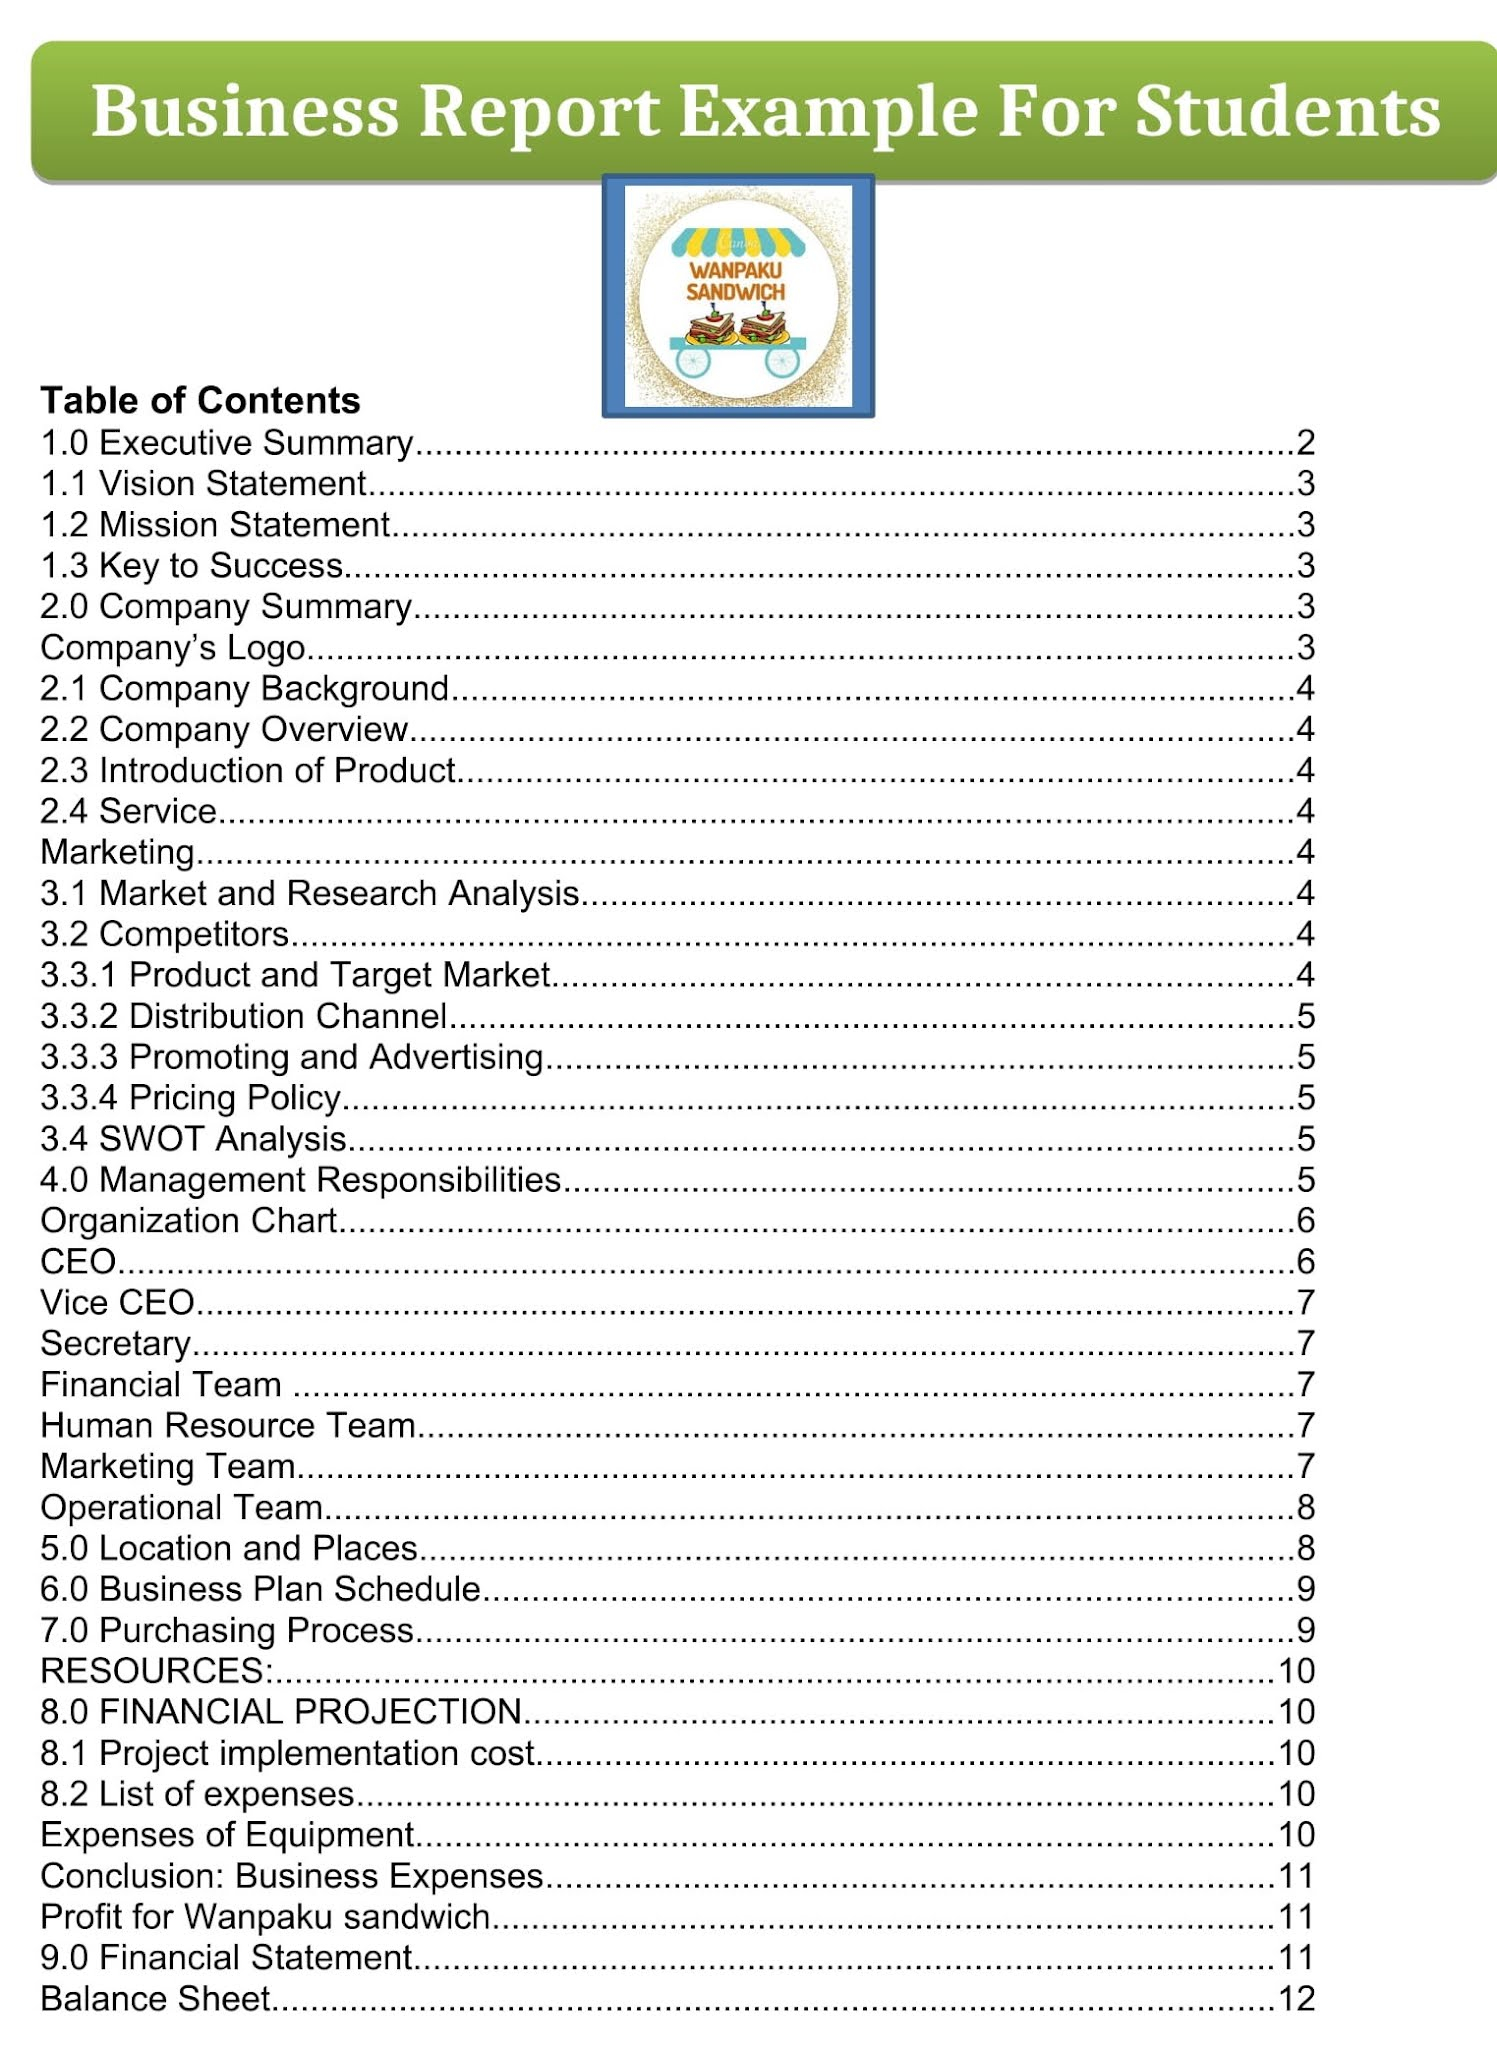 Business Report Example and Sample For Students PDF Within Company Report Format Template